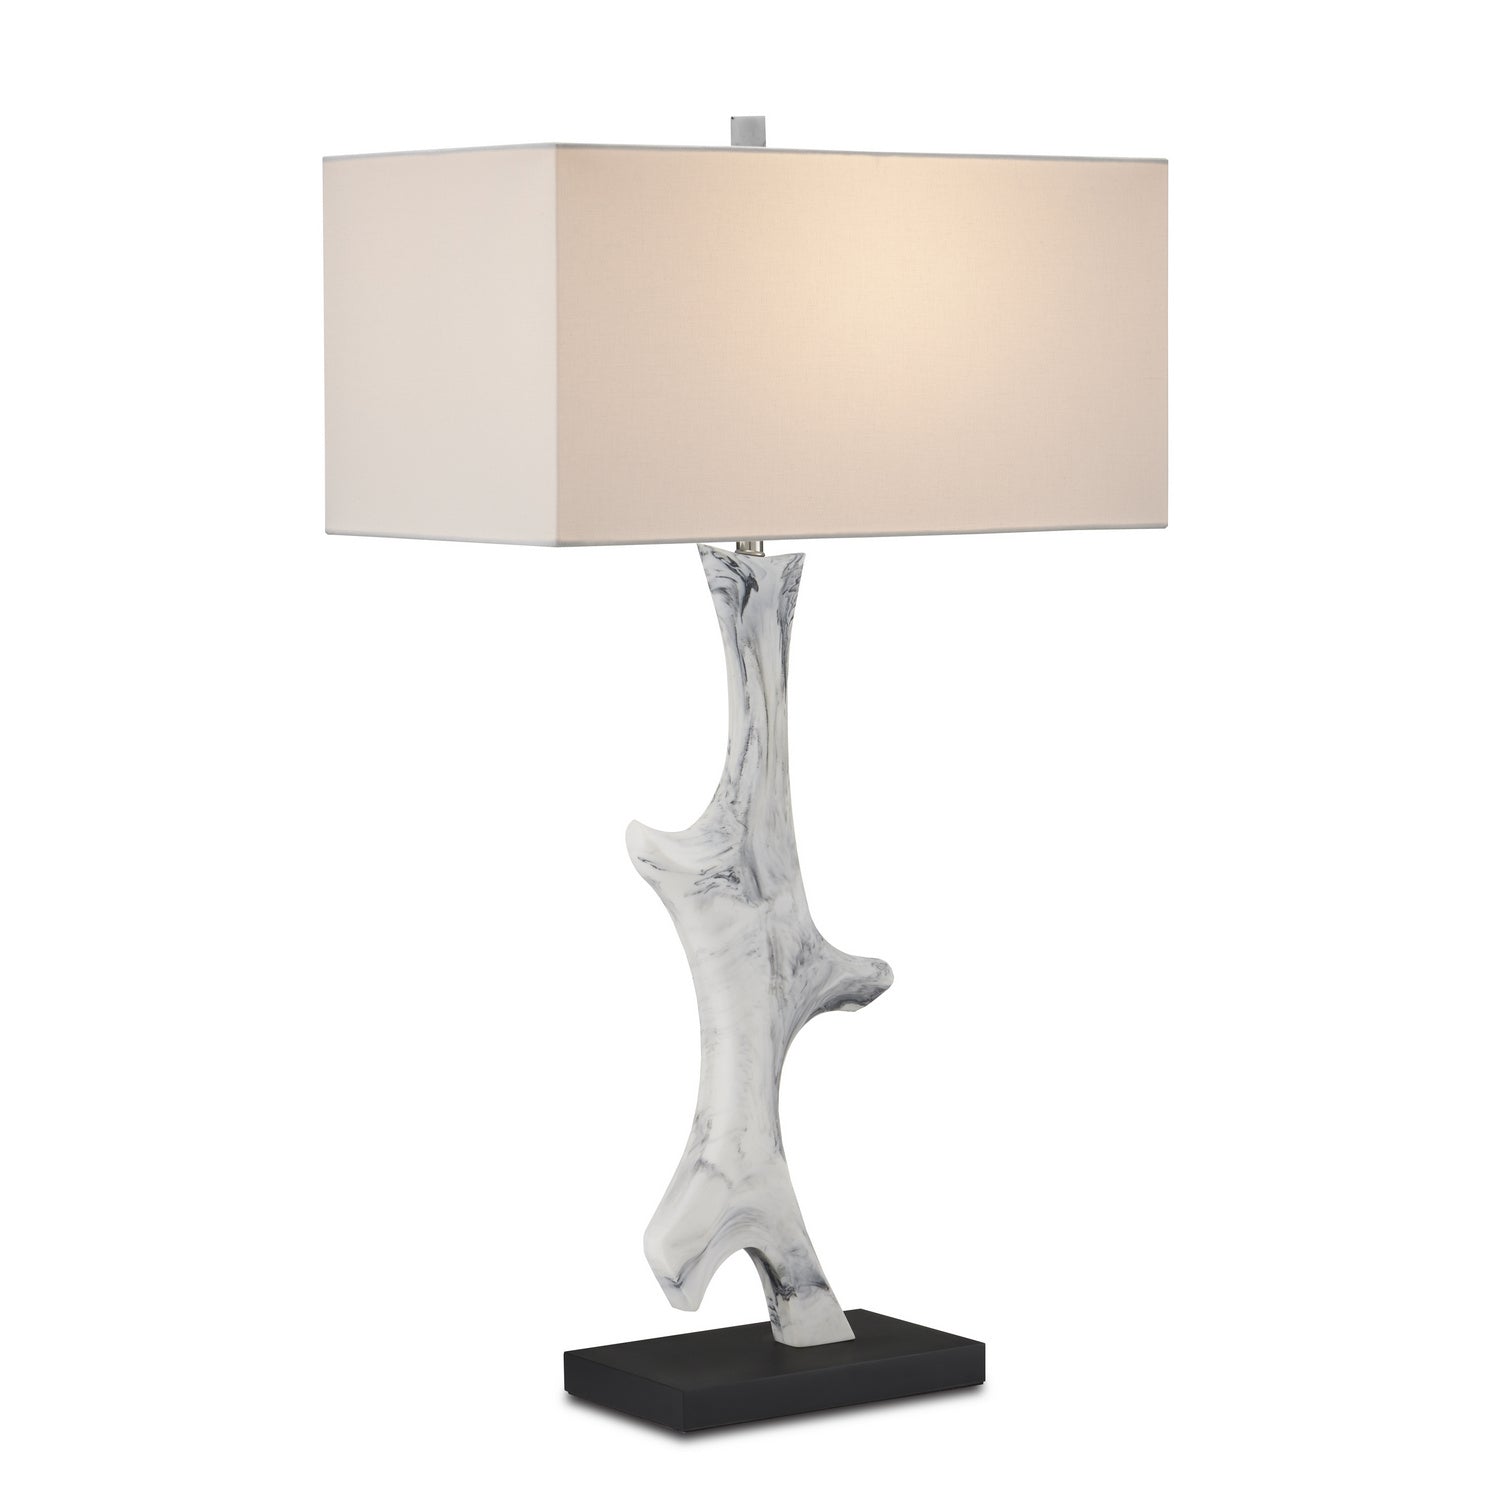 Currey and Company - 6000-0817 - One Light Table Lamp - Devant - White/Gray/Black